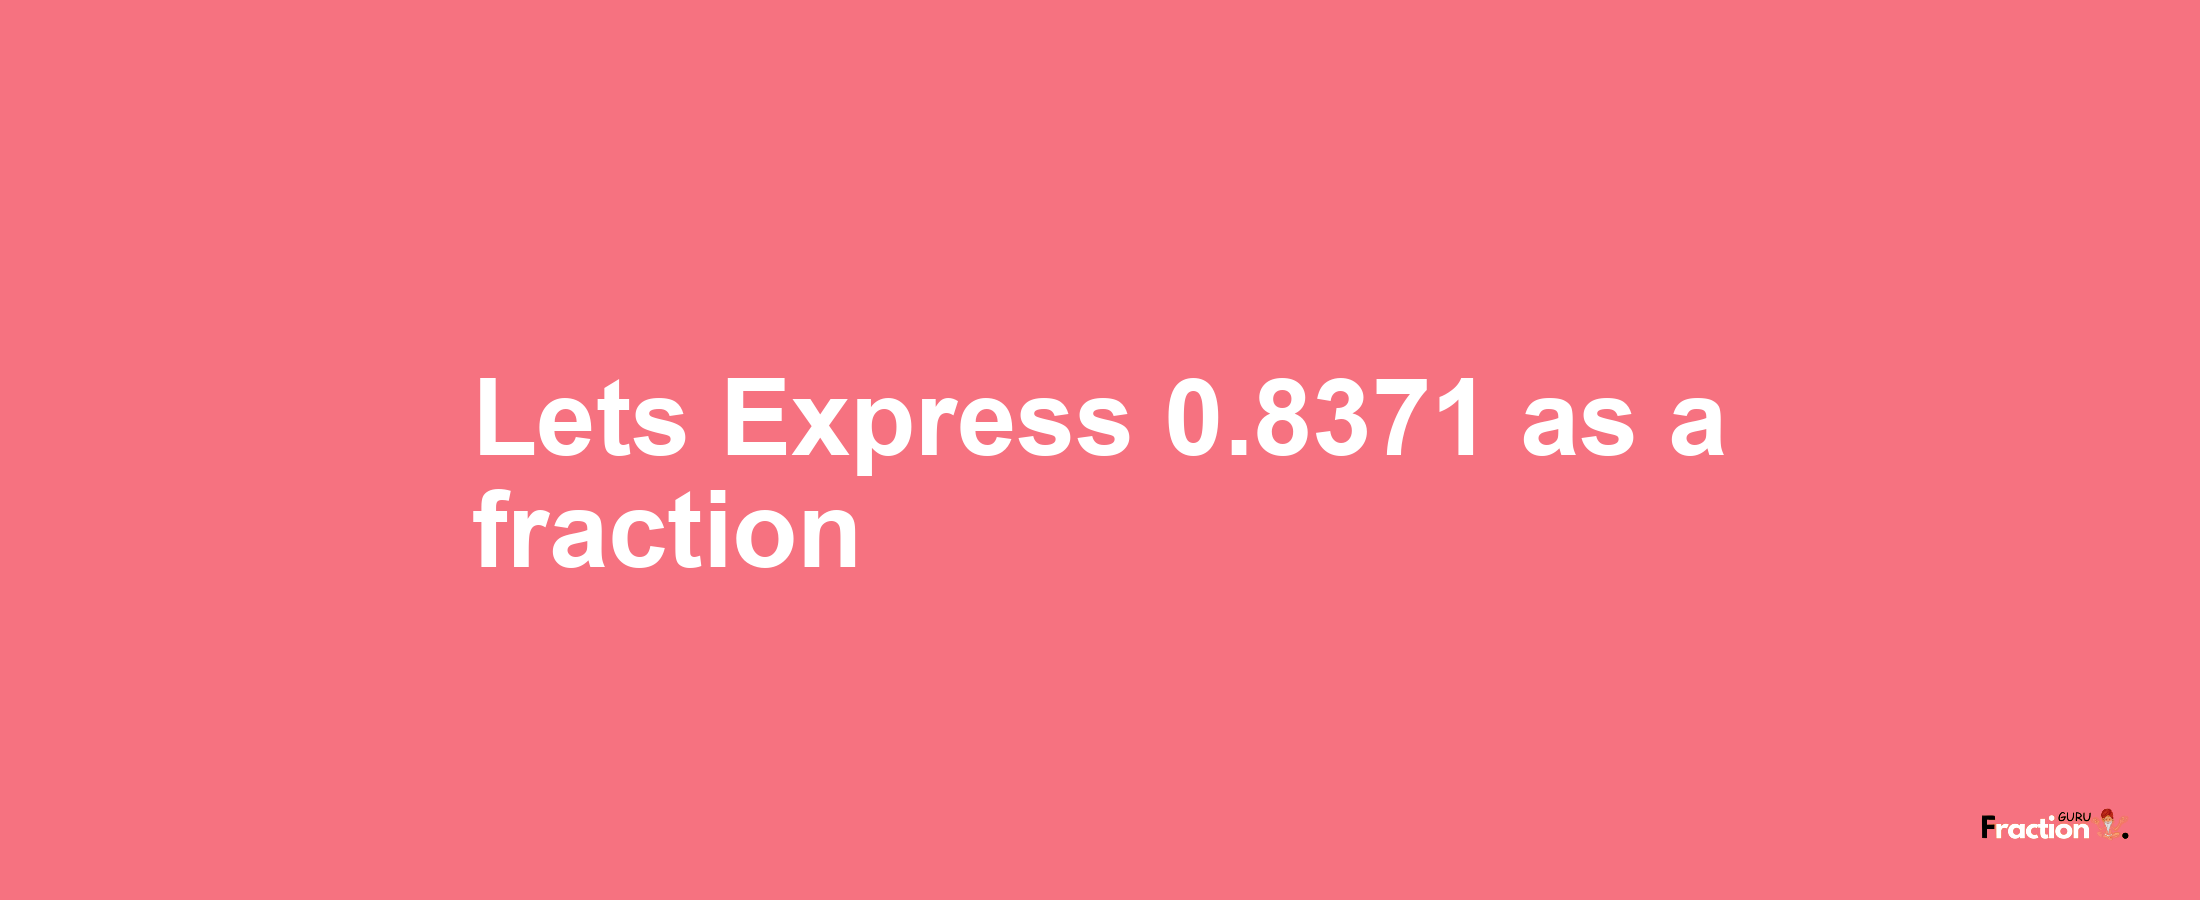 Lets Express 0.8371 as afraction